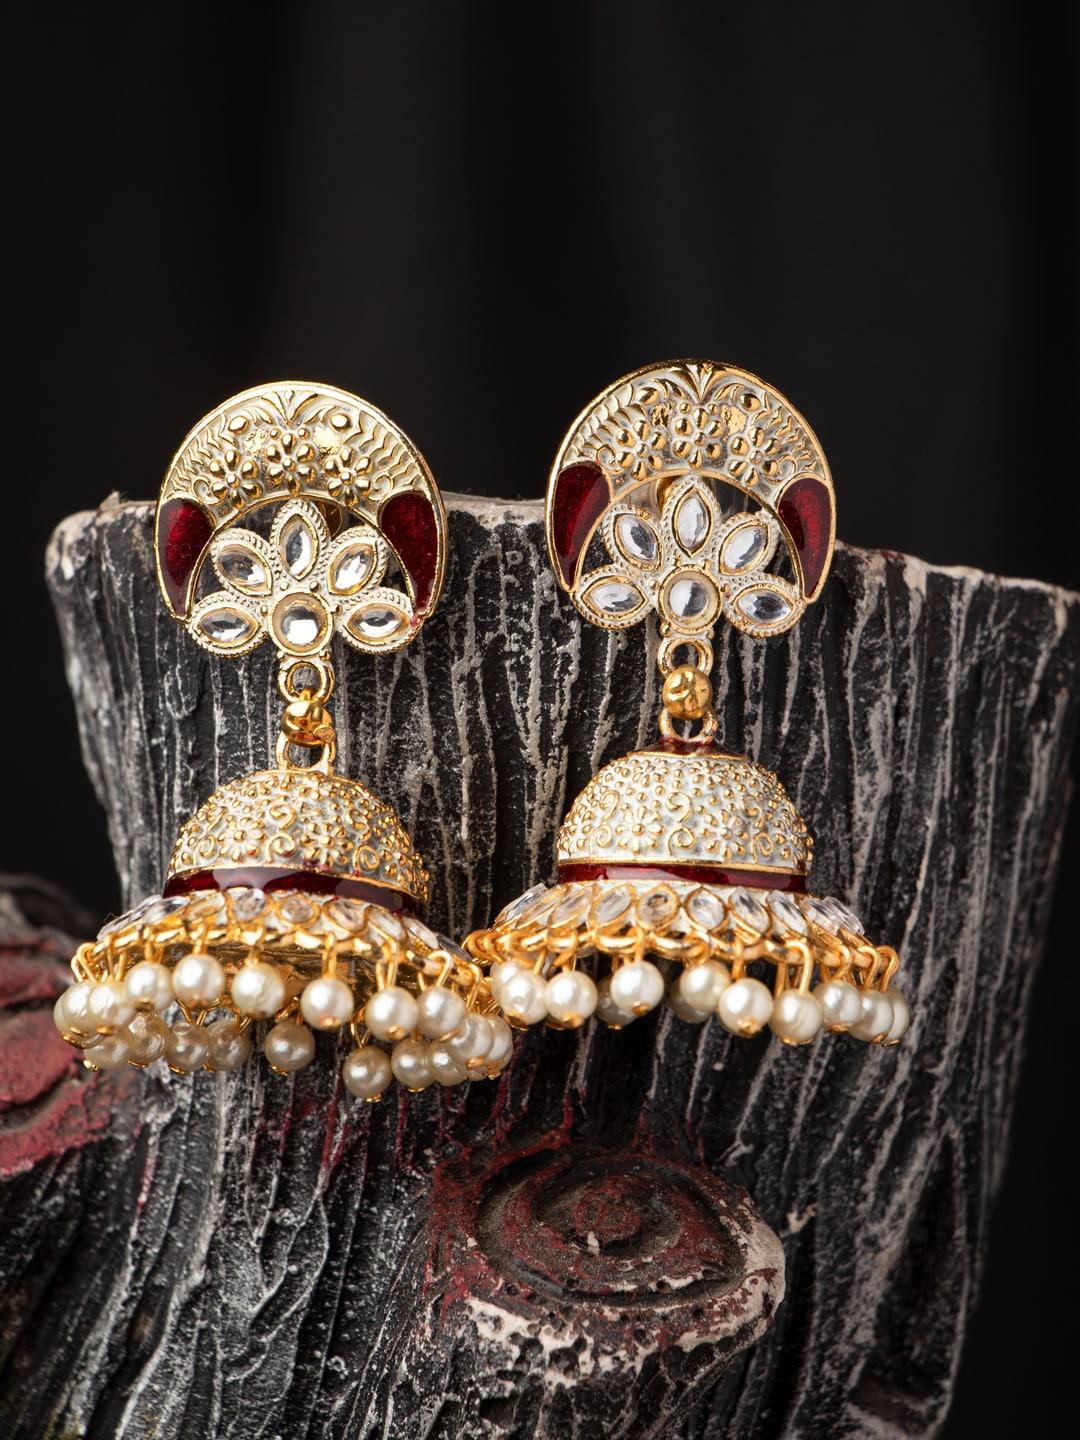 morkanth jewellery cream-coloured contemporary jhumkas earrings